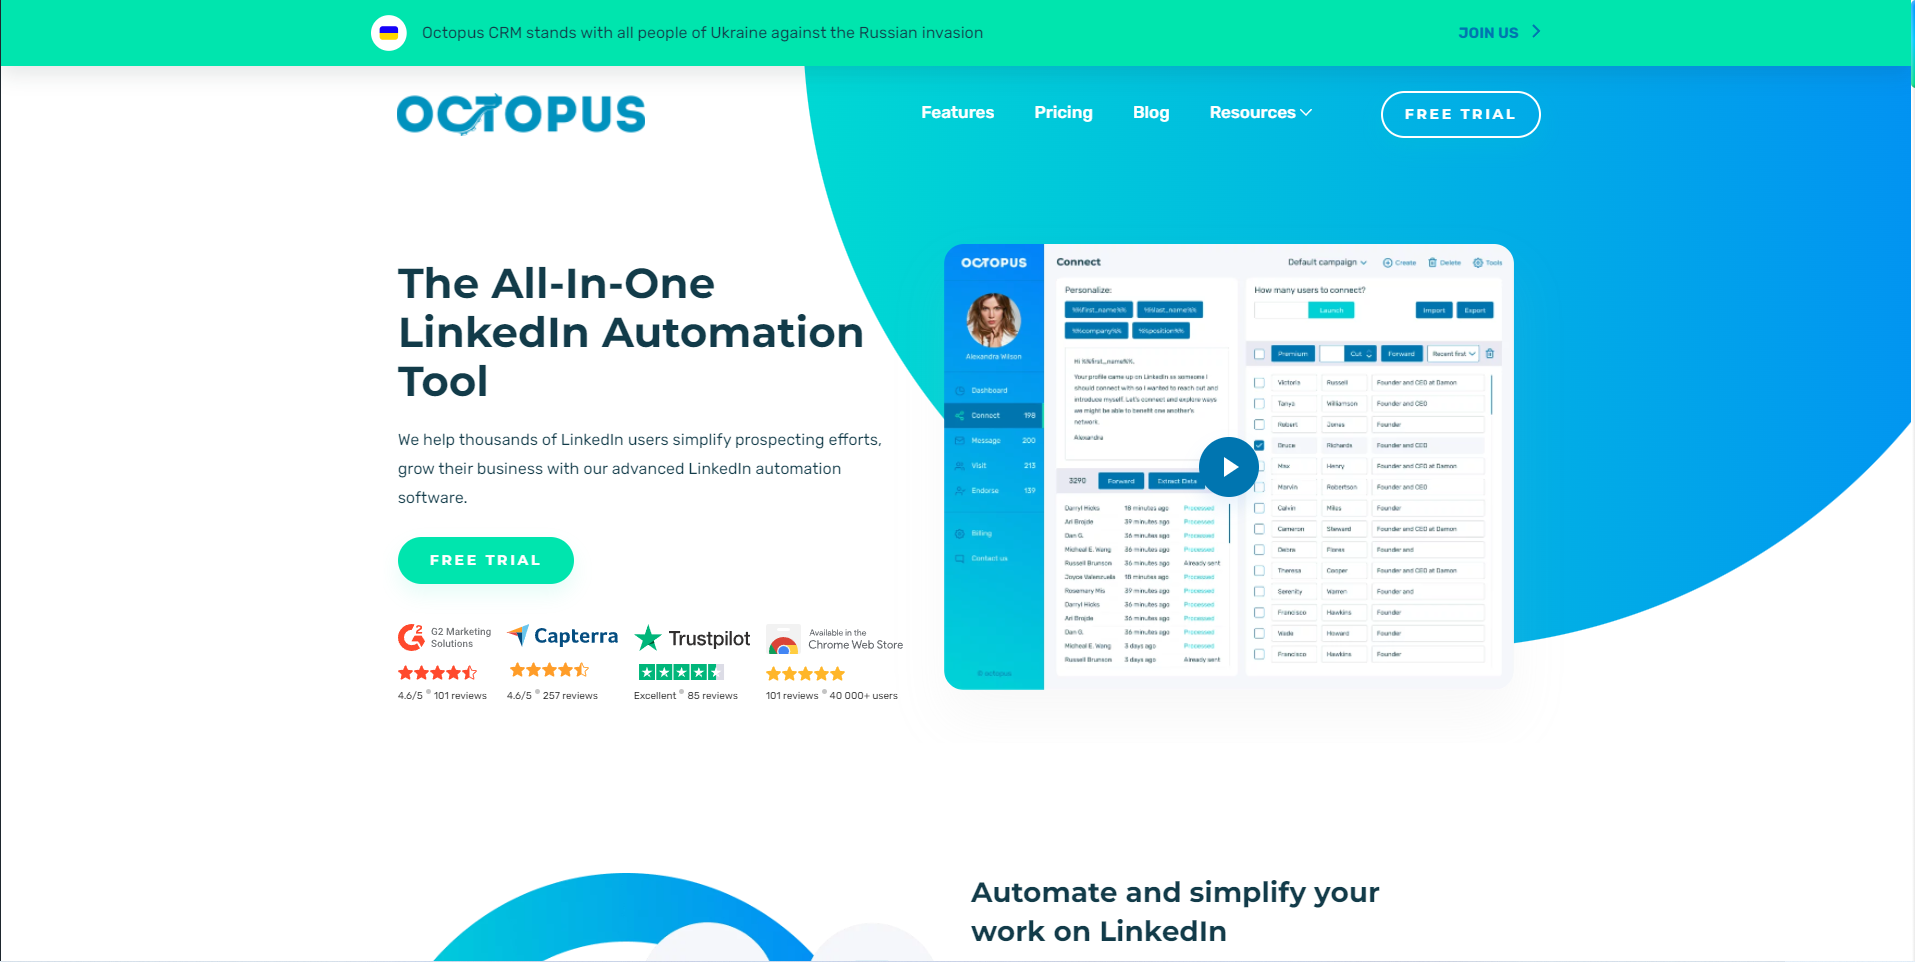 OctopusCRM - The #1 LinkedIn Automation Tool